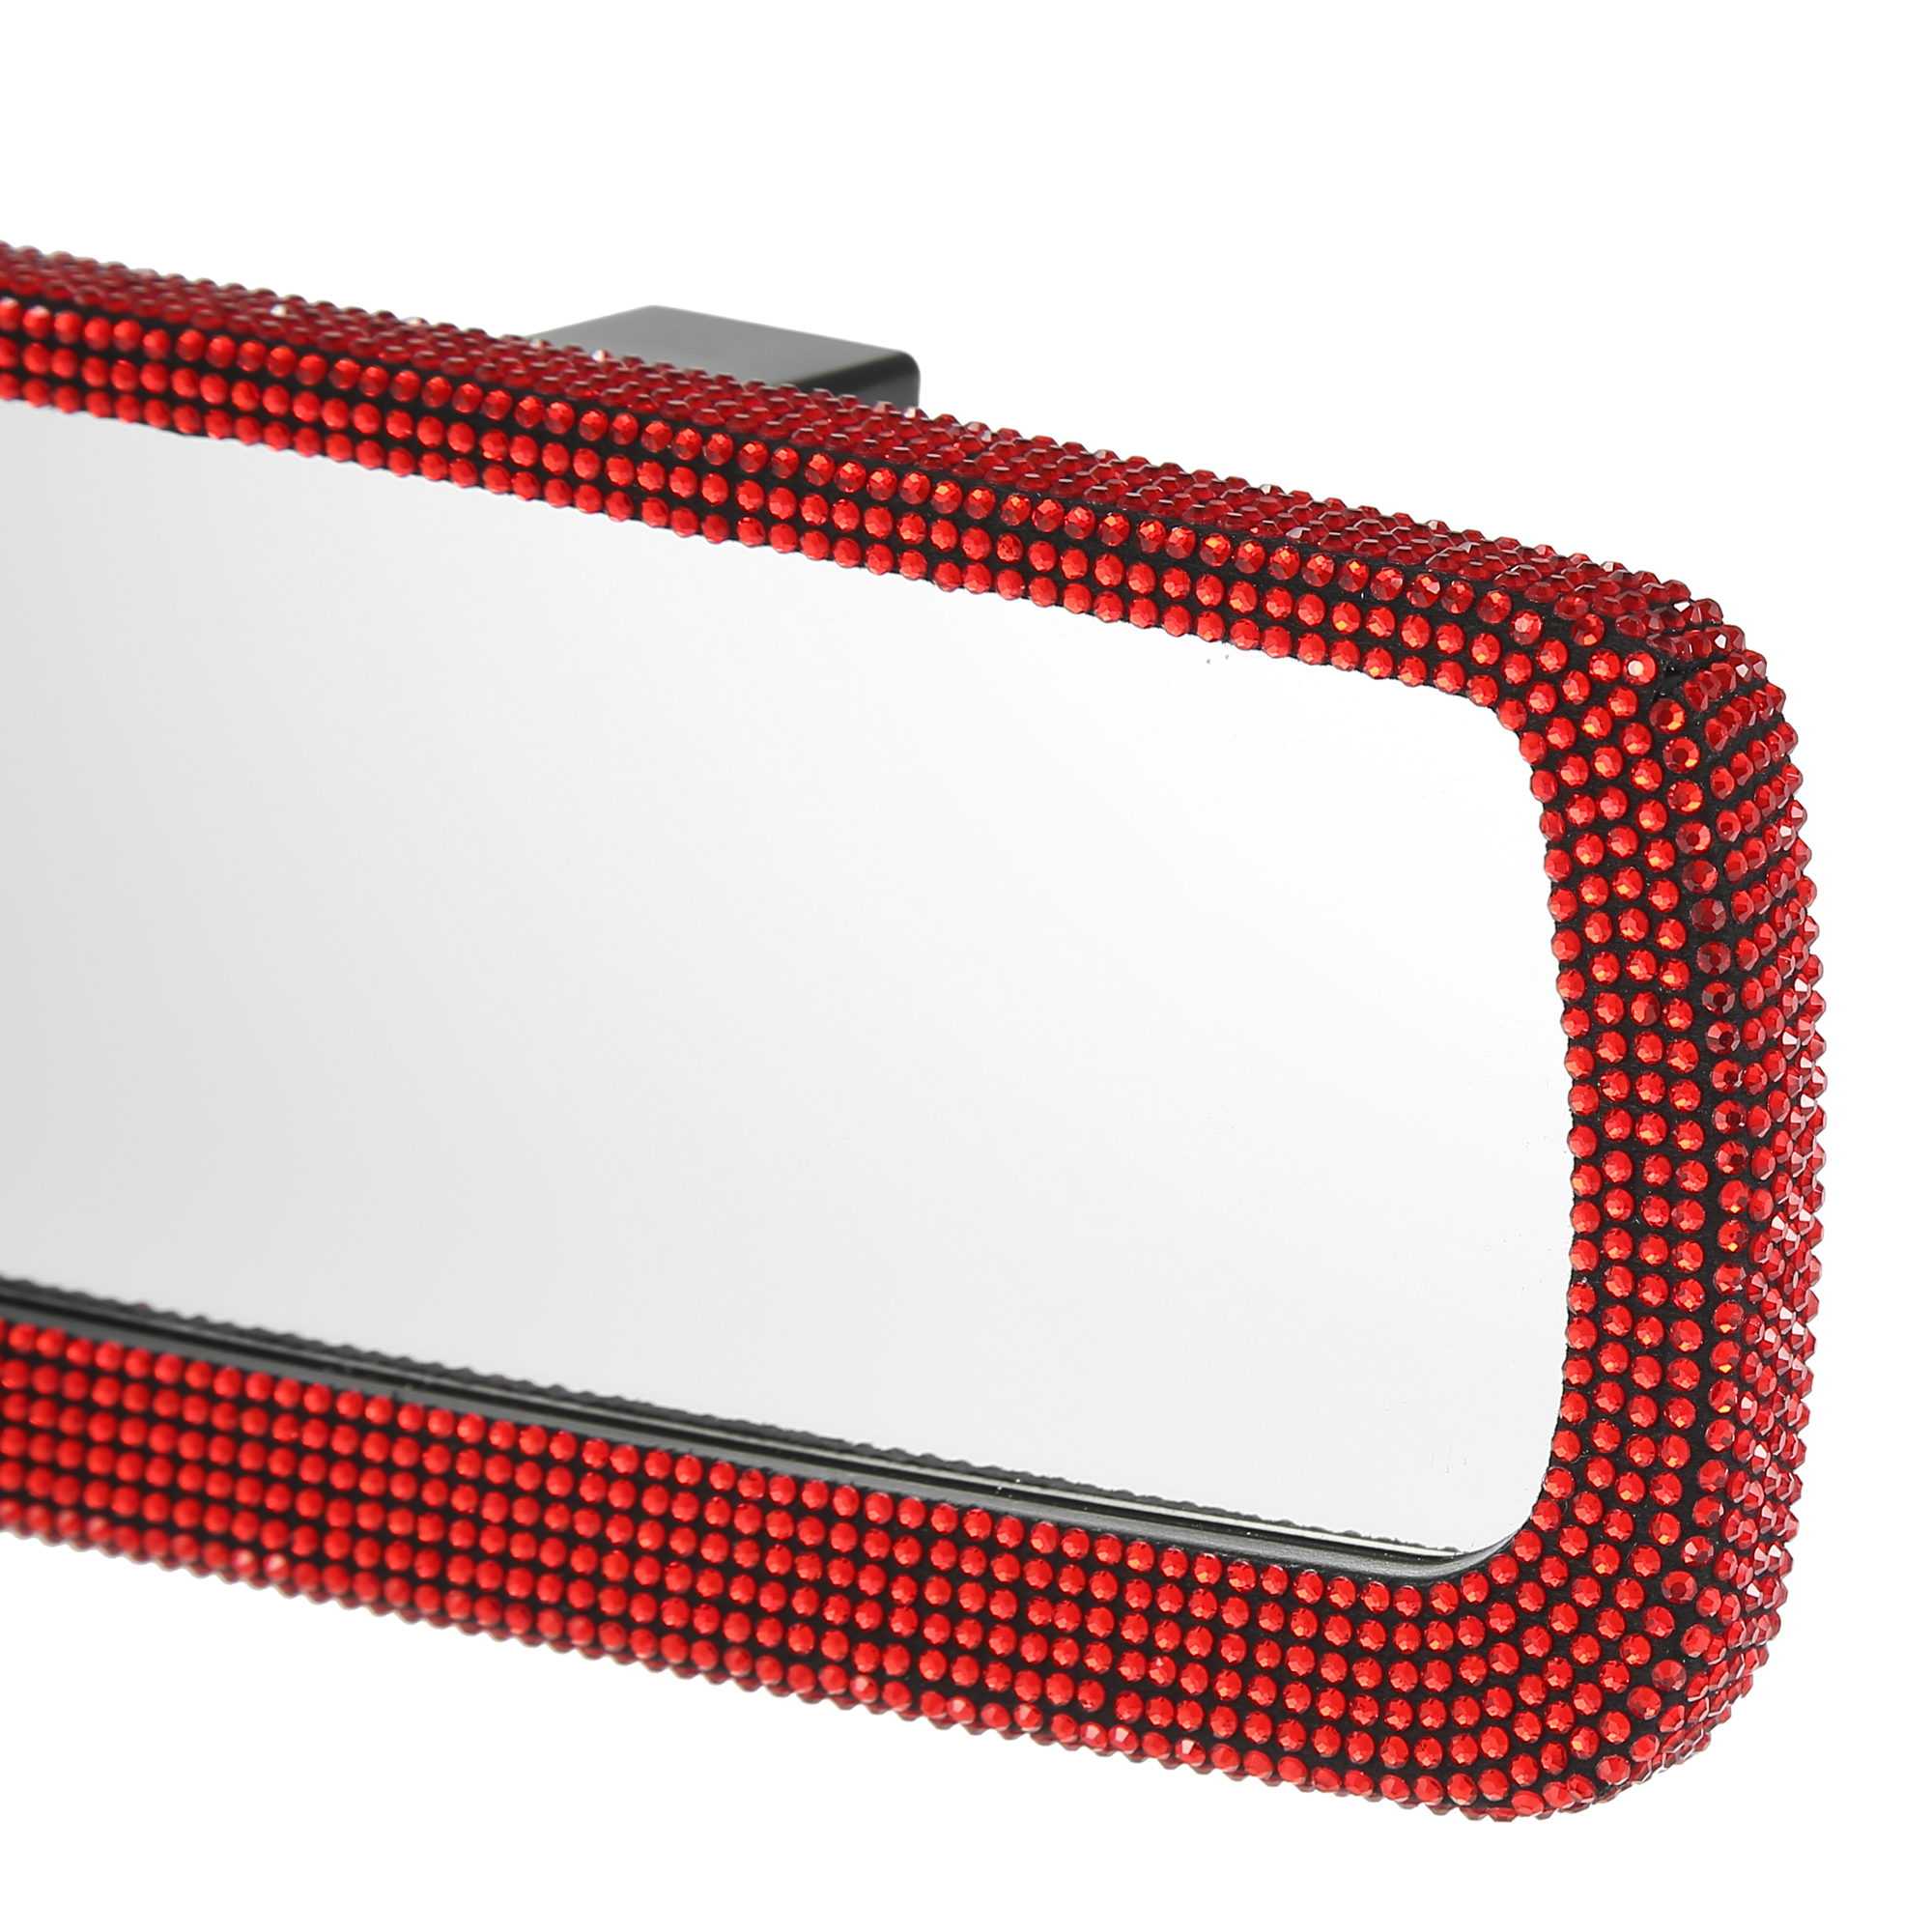 Unique Bargains Bling Car Rear View Mirror with Faux Crystal Rhinestone Interior for Women Red